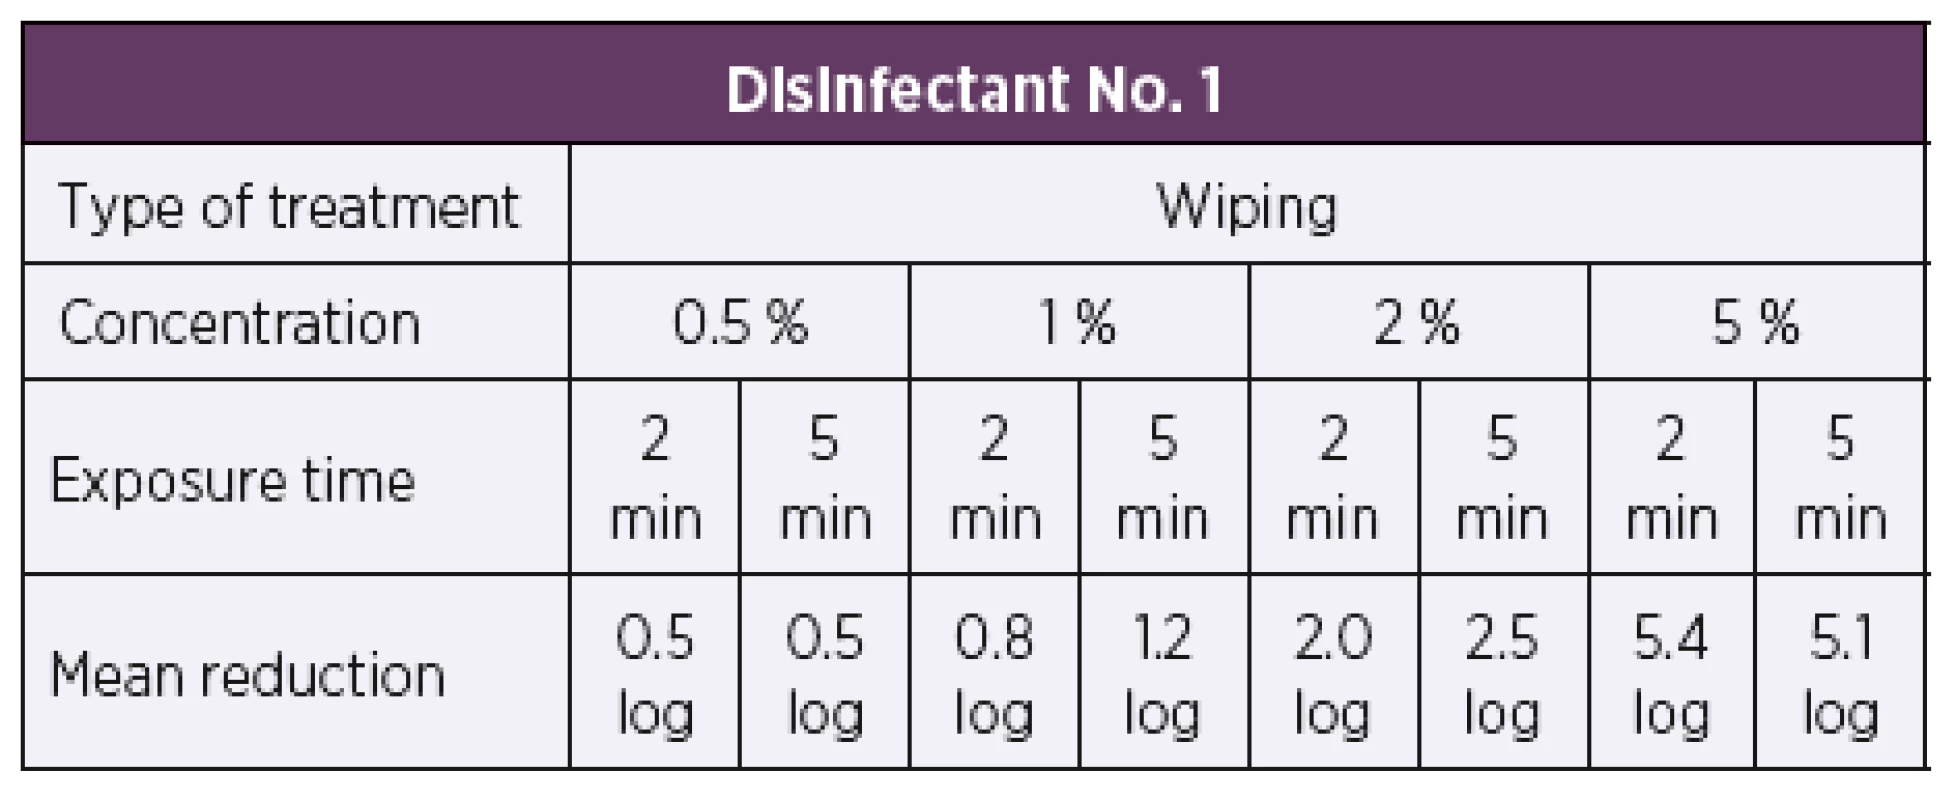 Overview of the mean log reduction in the bacterial counts
achieved using disinfectant No. 1 depending on the concentration and
exposure time when tested by the carrier wiping method